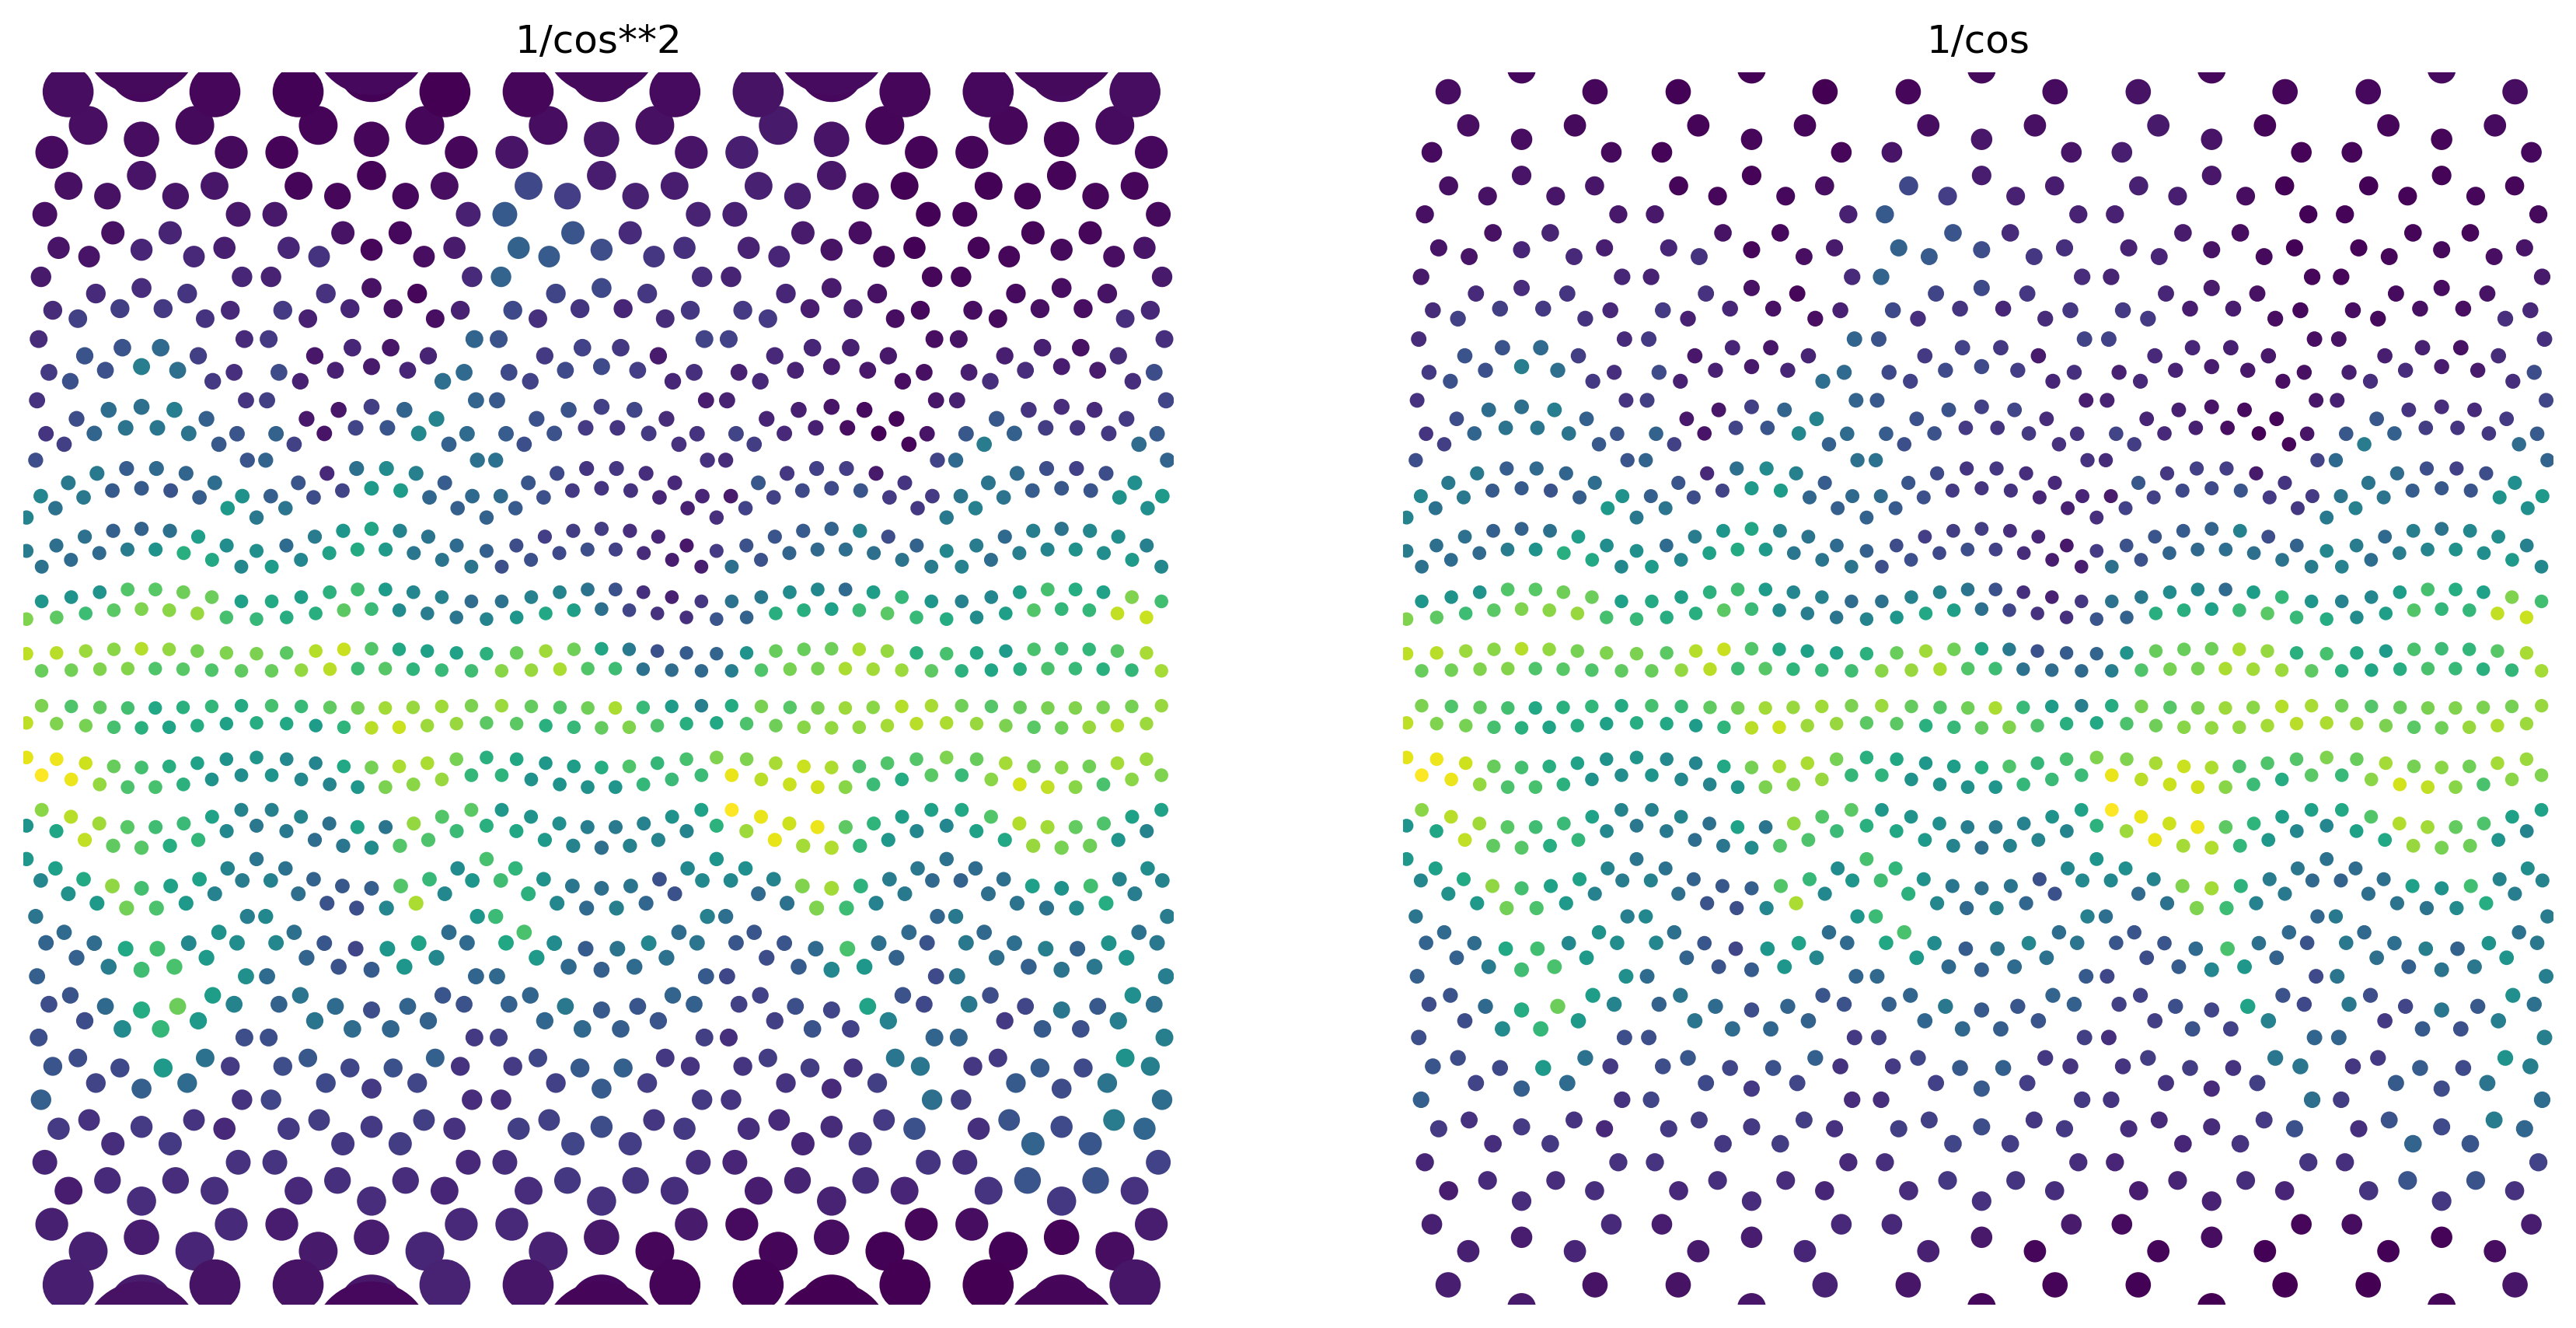 ../../_images/Processing_playing_with_triangles_subsampling_and_averaging_17_0.png